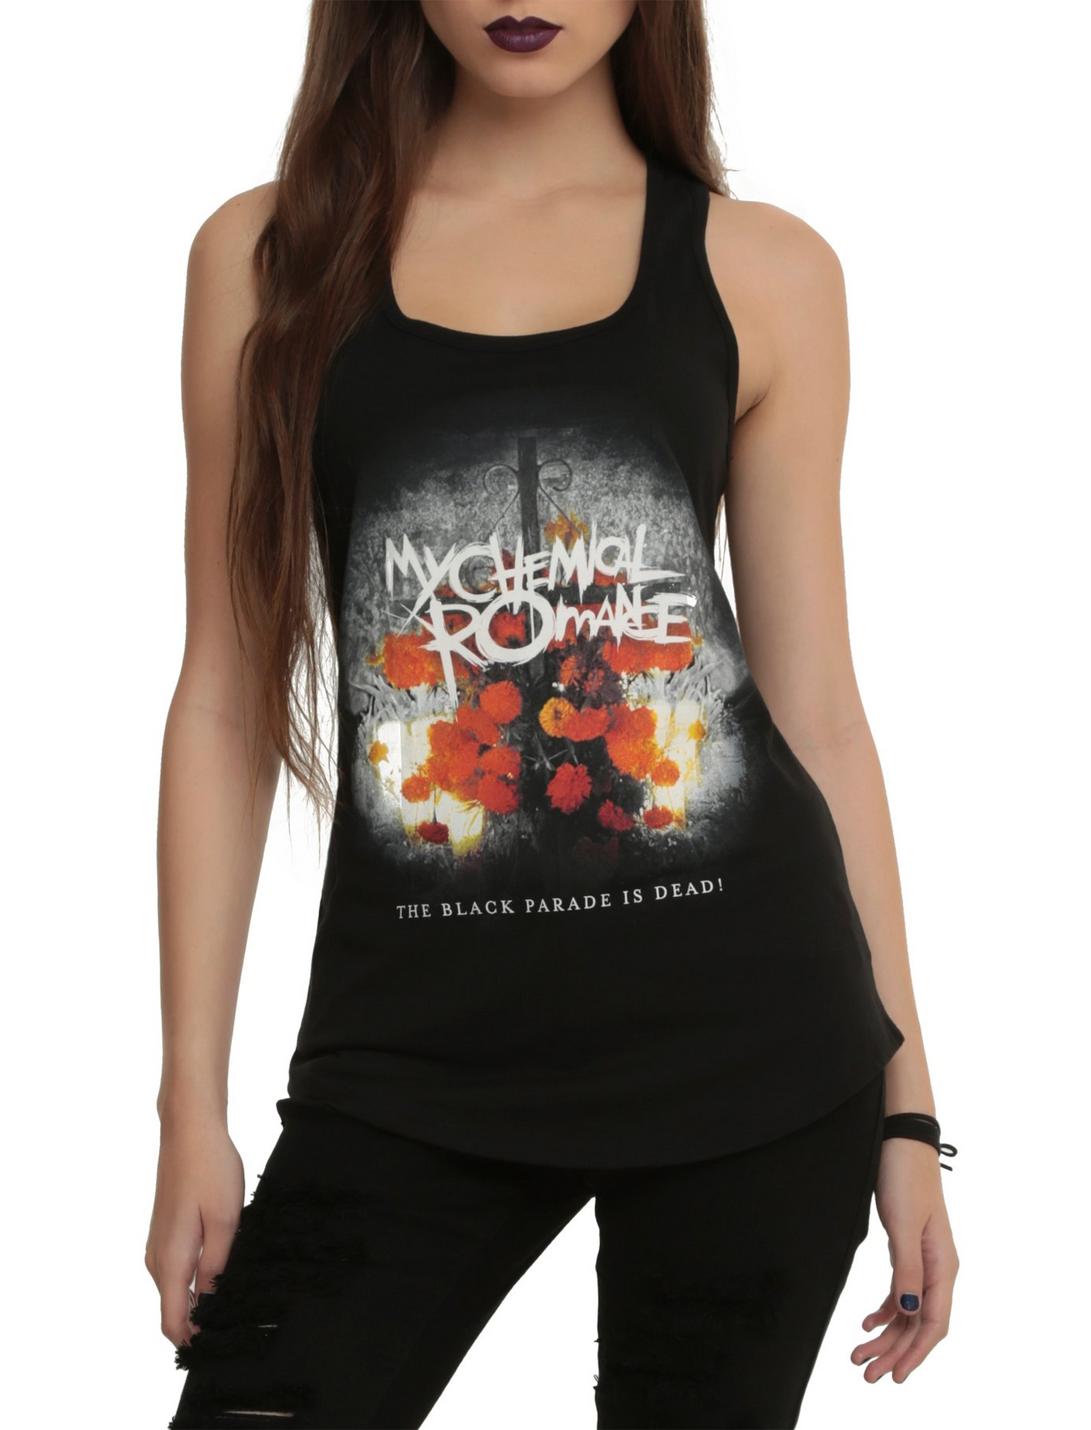 My Chemical Romance The Black Parade Is Dead! Girls Tank Top, BLACK, hi-res